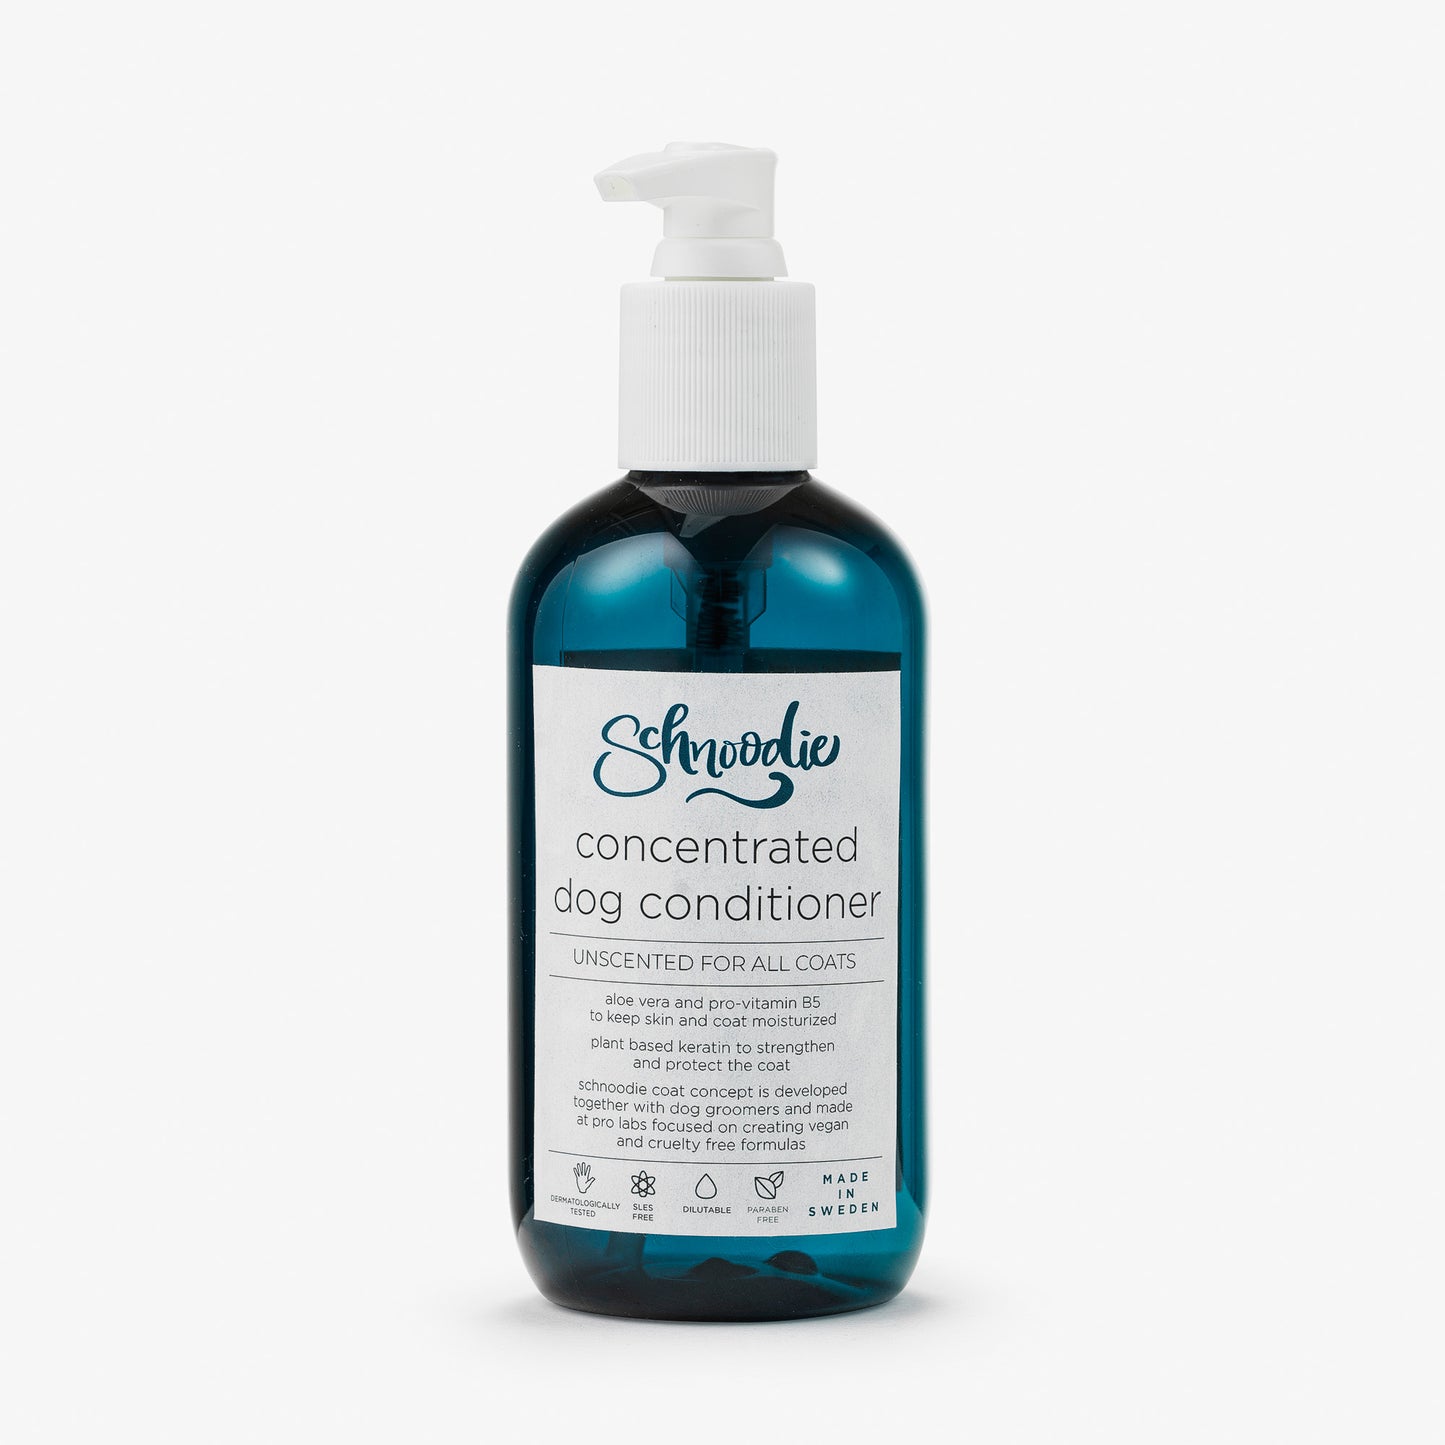 Dog Conditioner - concentrated and unscented conditioner